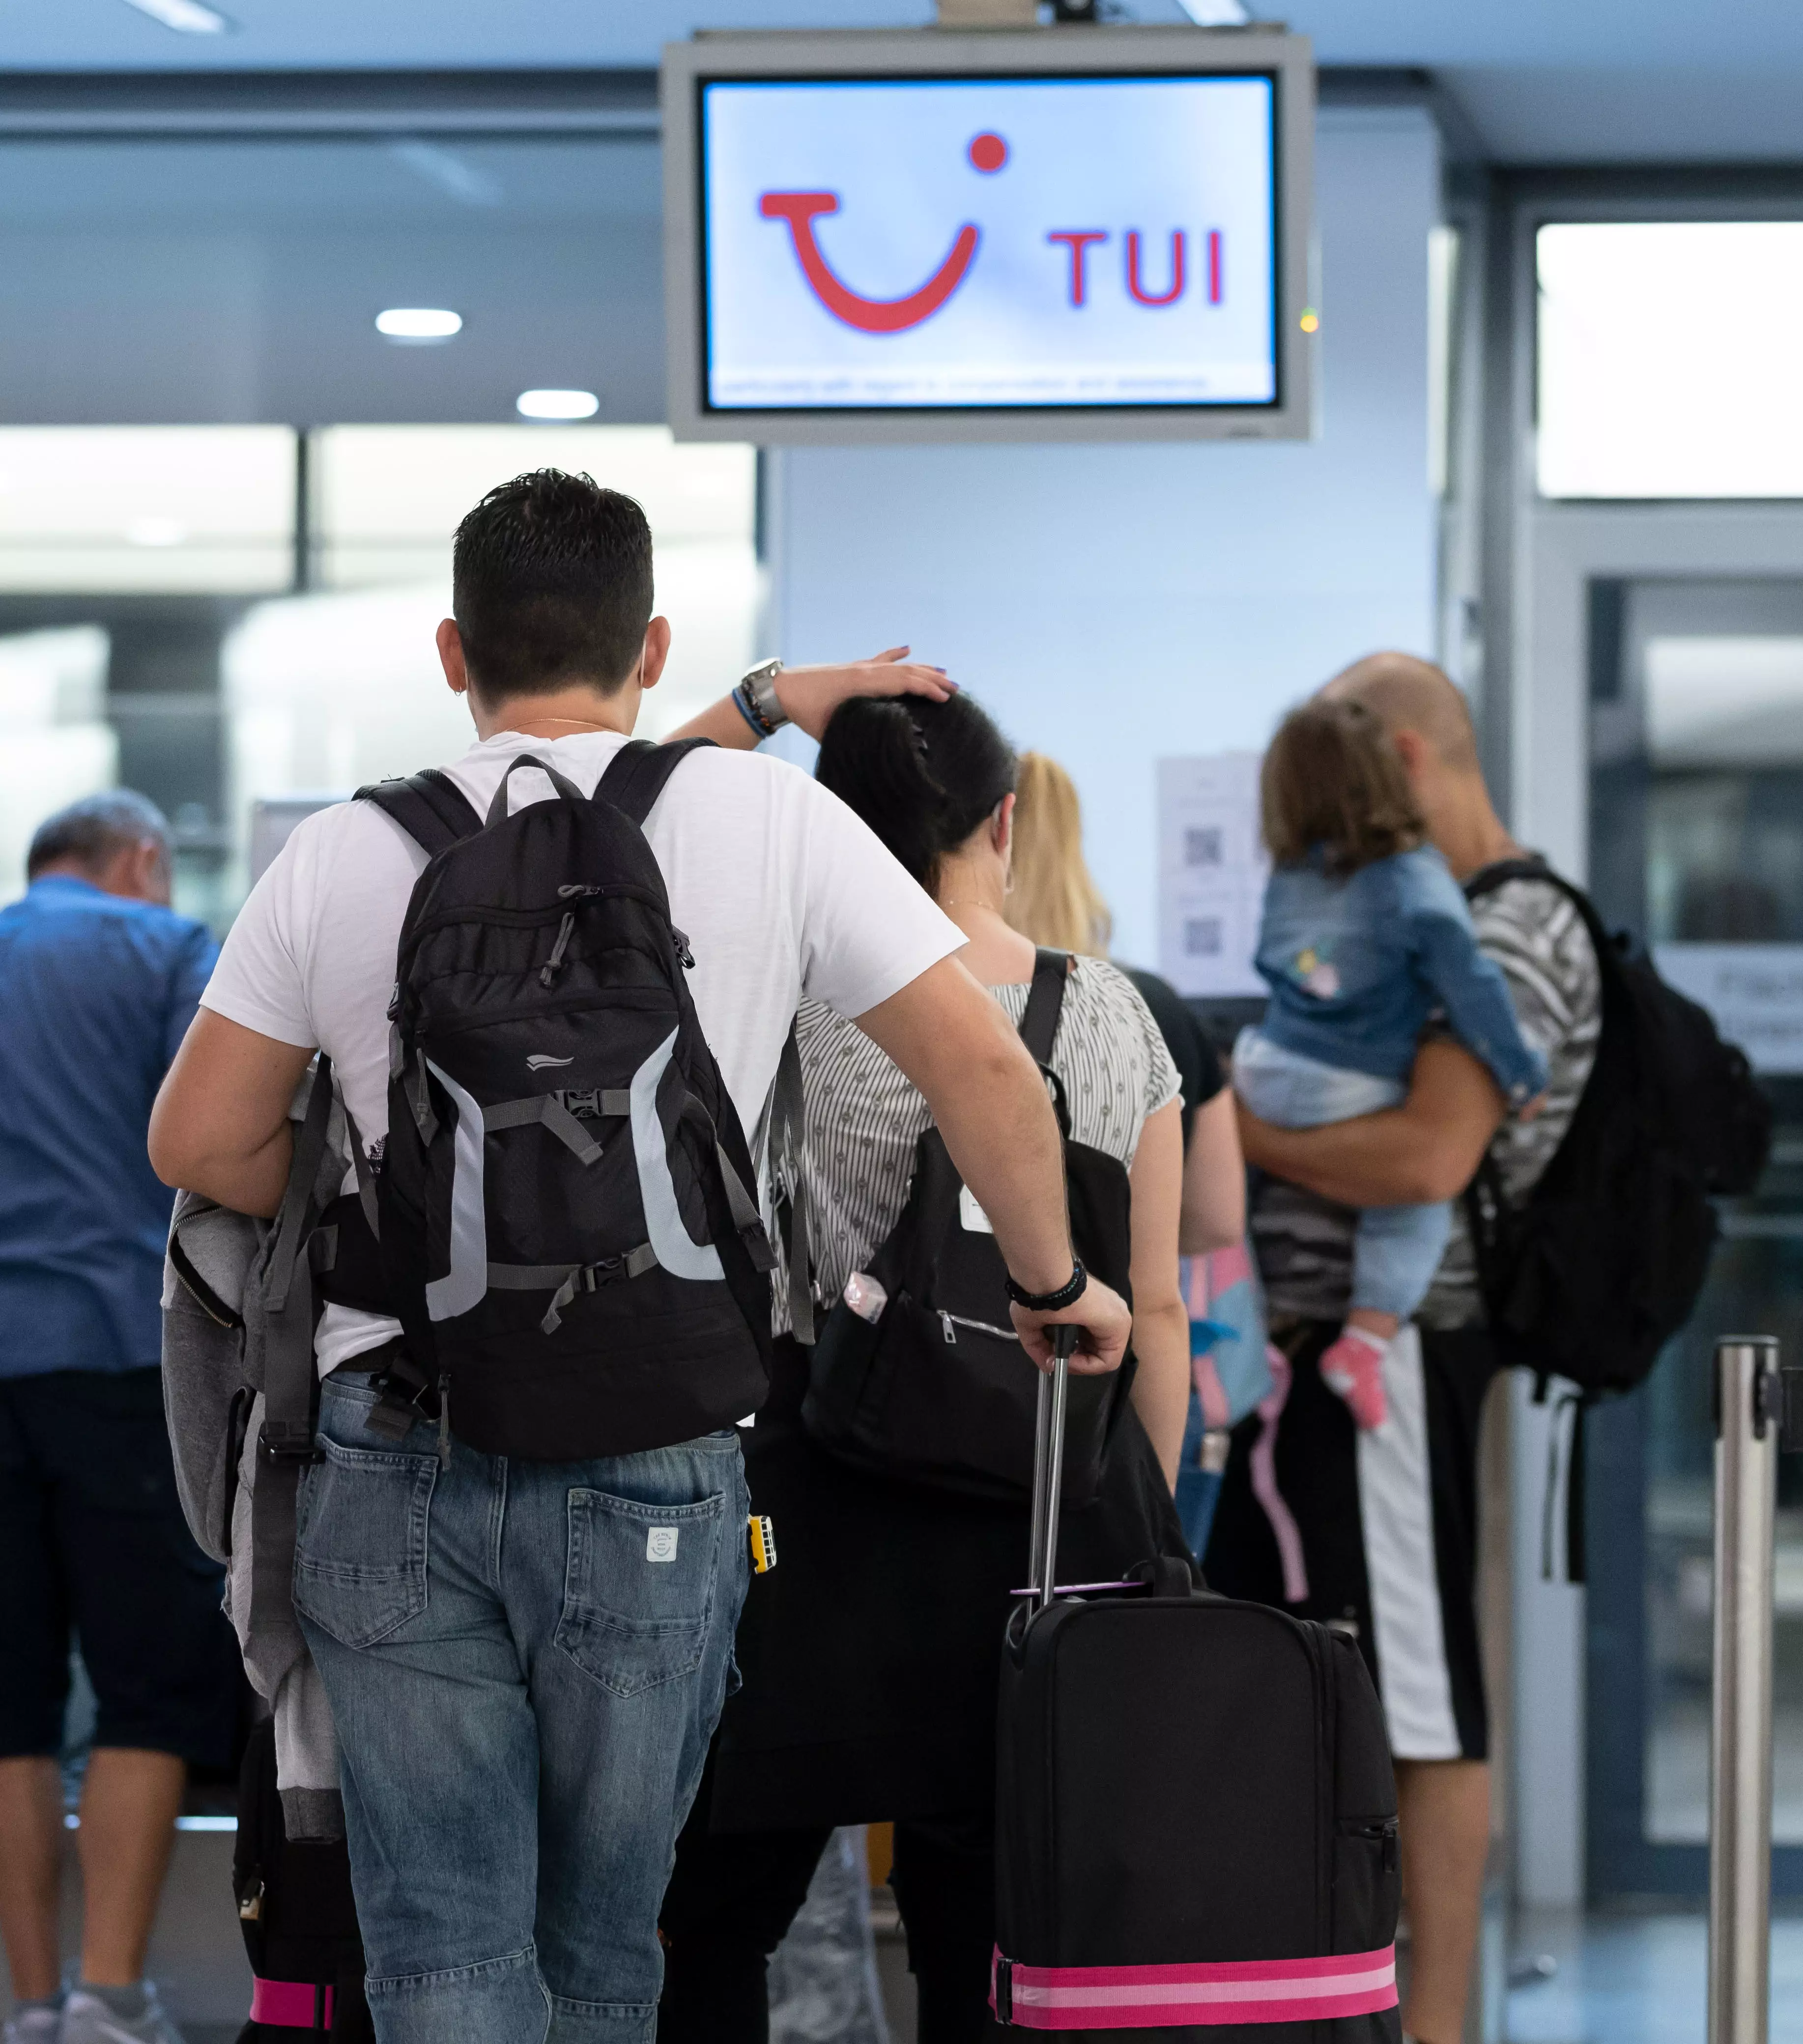 Passengers on a TUI flight have been told to self-isolate.